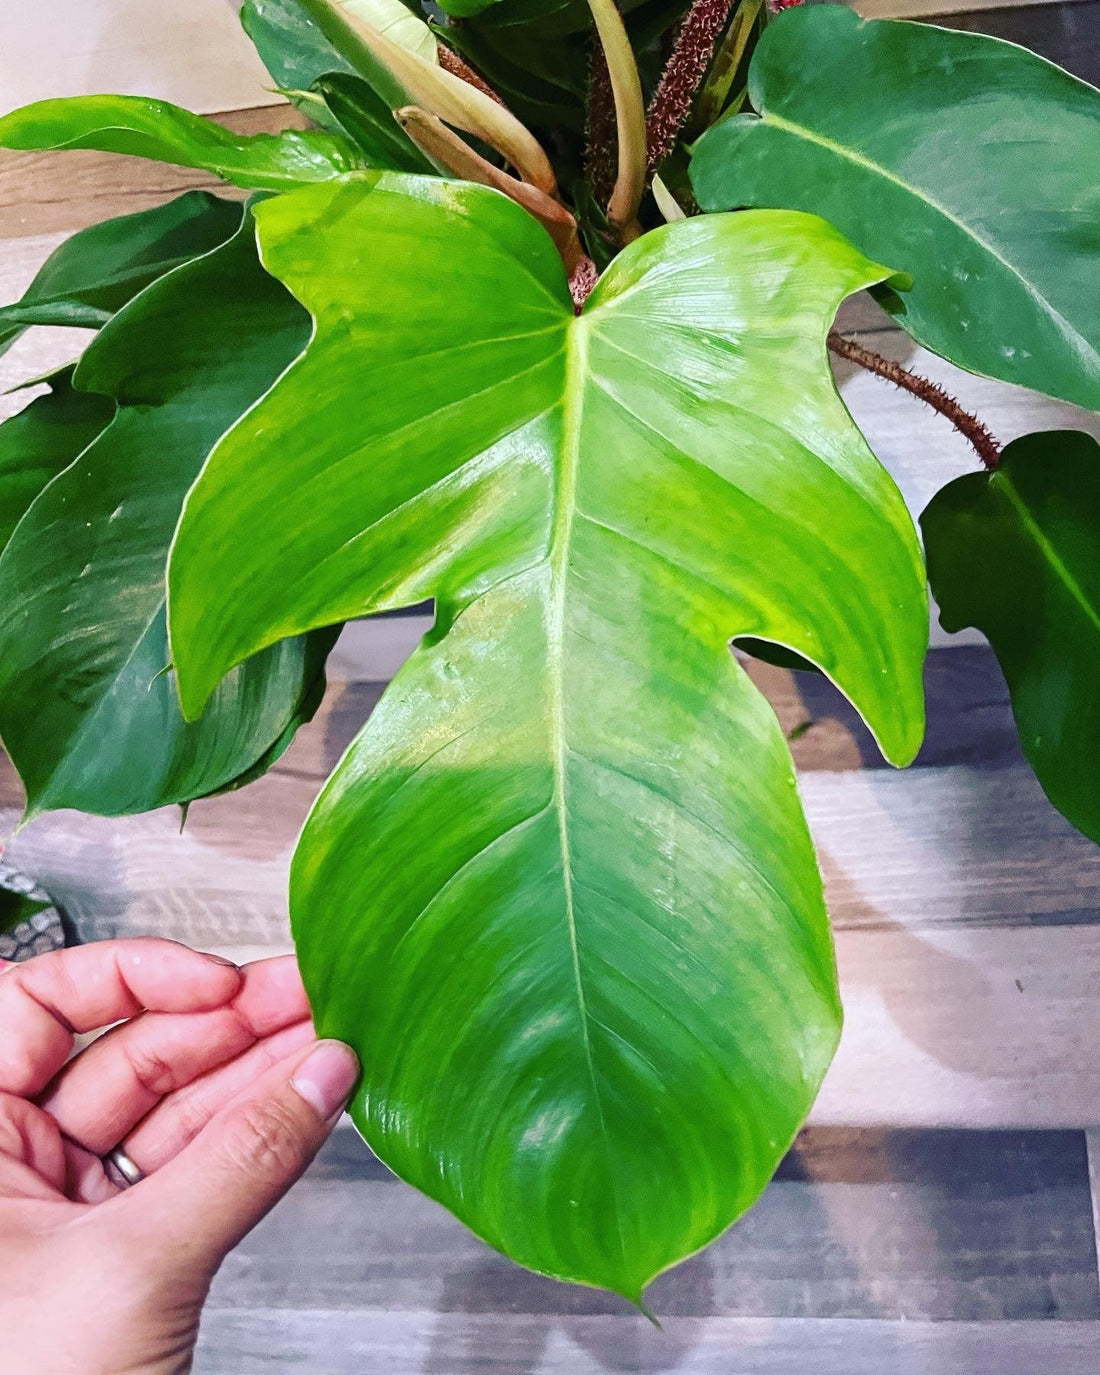 XL -Philodendron squamiferum hard to find this size -large leaves -hairy stems - not exact plant